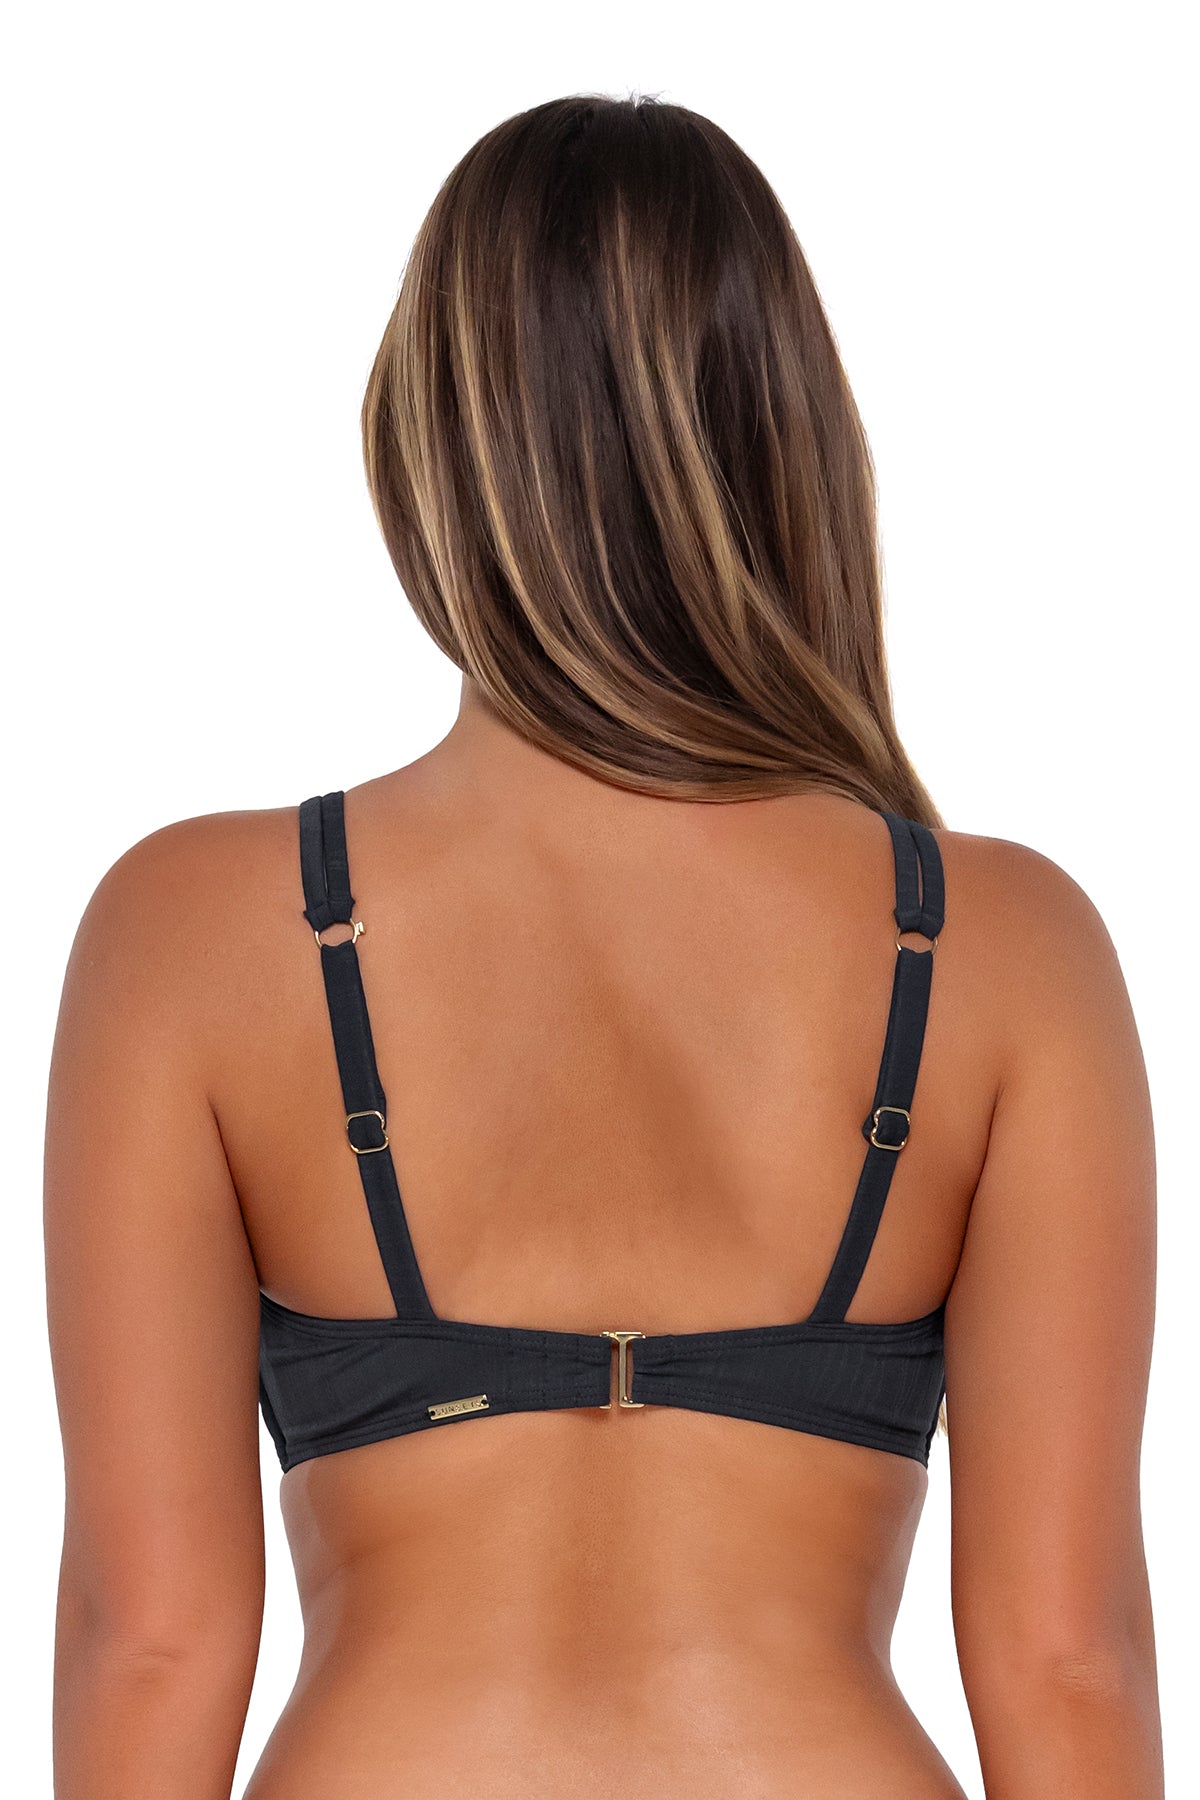 Back pose #1 of Taylor wearing Sunsets Slate Seagrass Texture Taylor Bralette Top